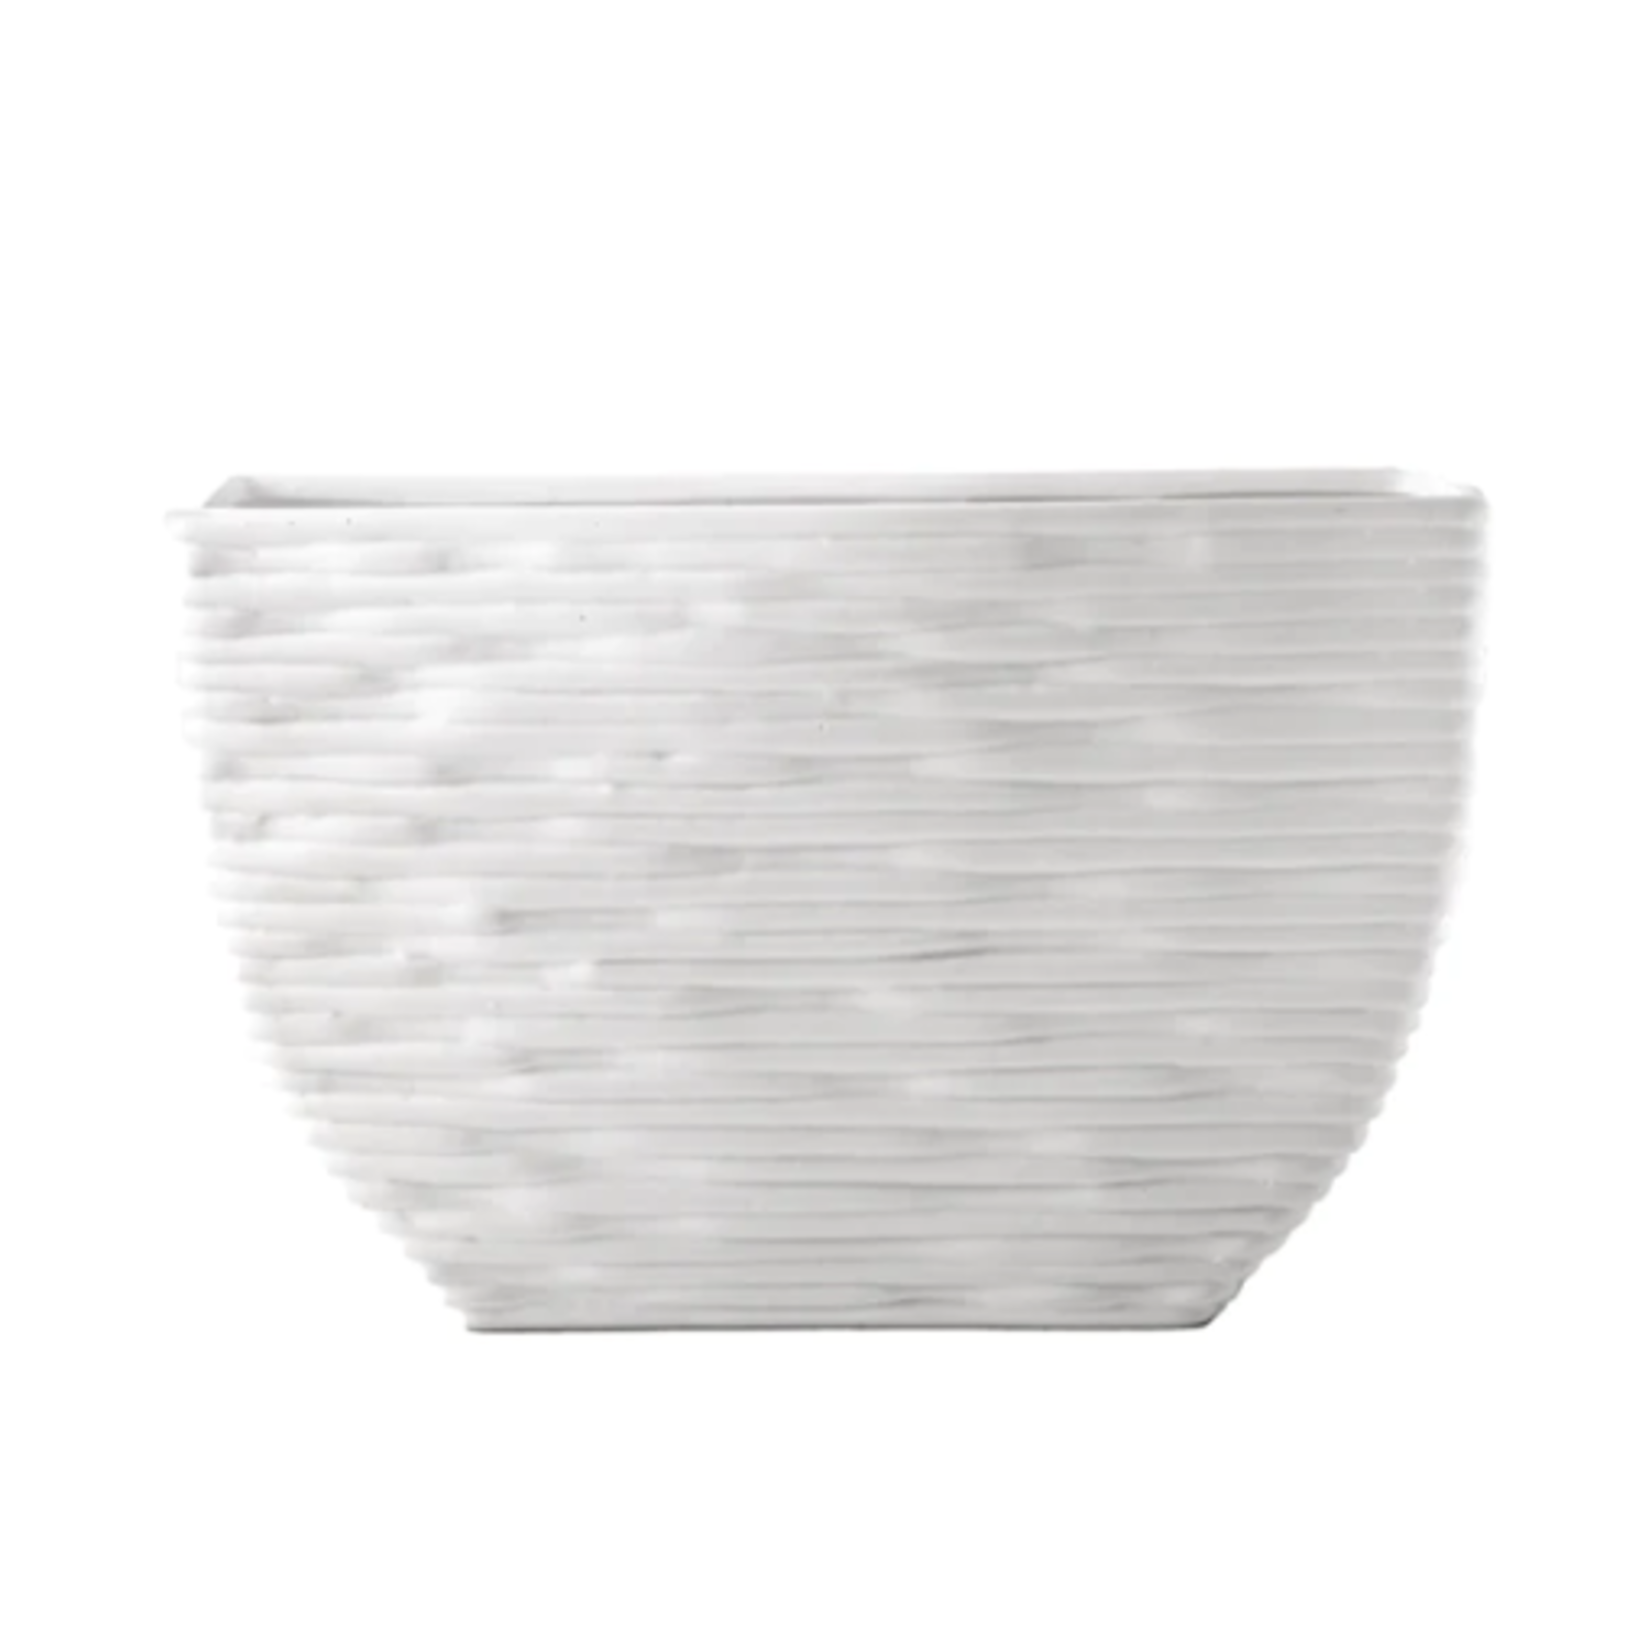 50% off was $50 now $25. 9.25”H X 5”W X 14”L WHITE CERAMIC ROUNDED TAPERED RECTANGLE EMBOSSED SEAMLESS